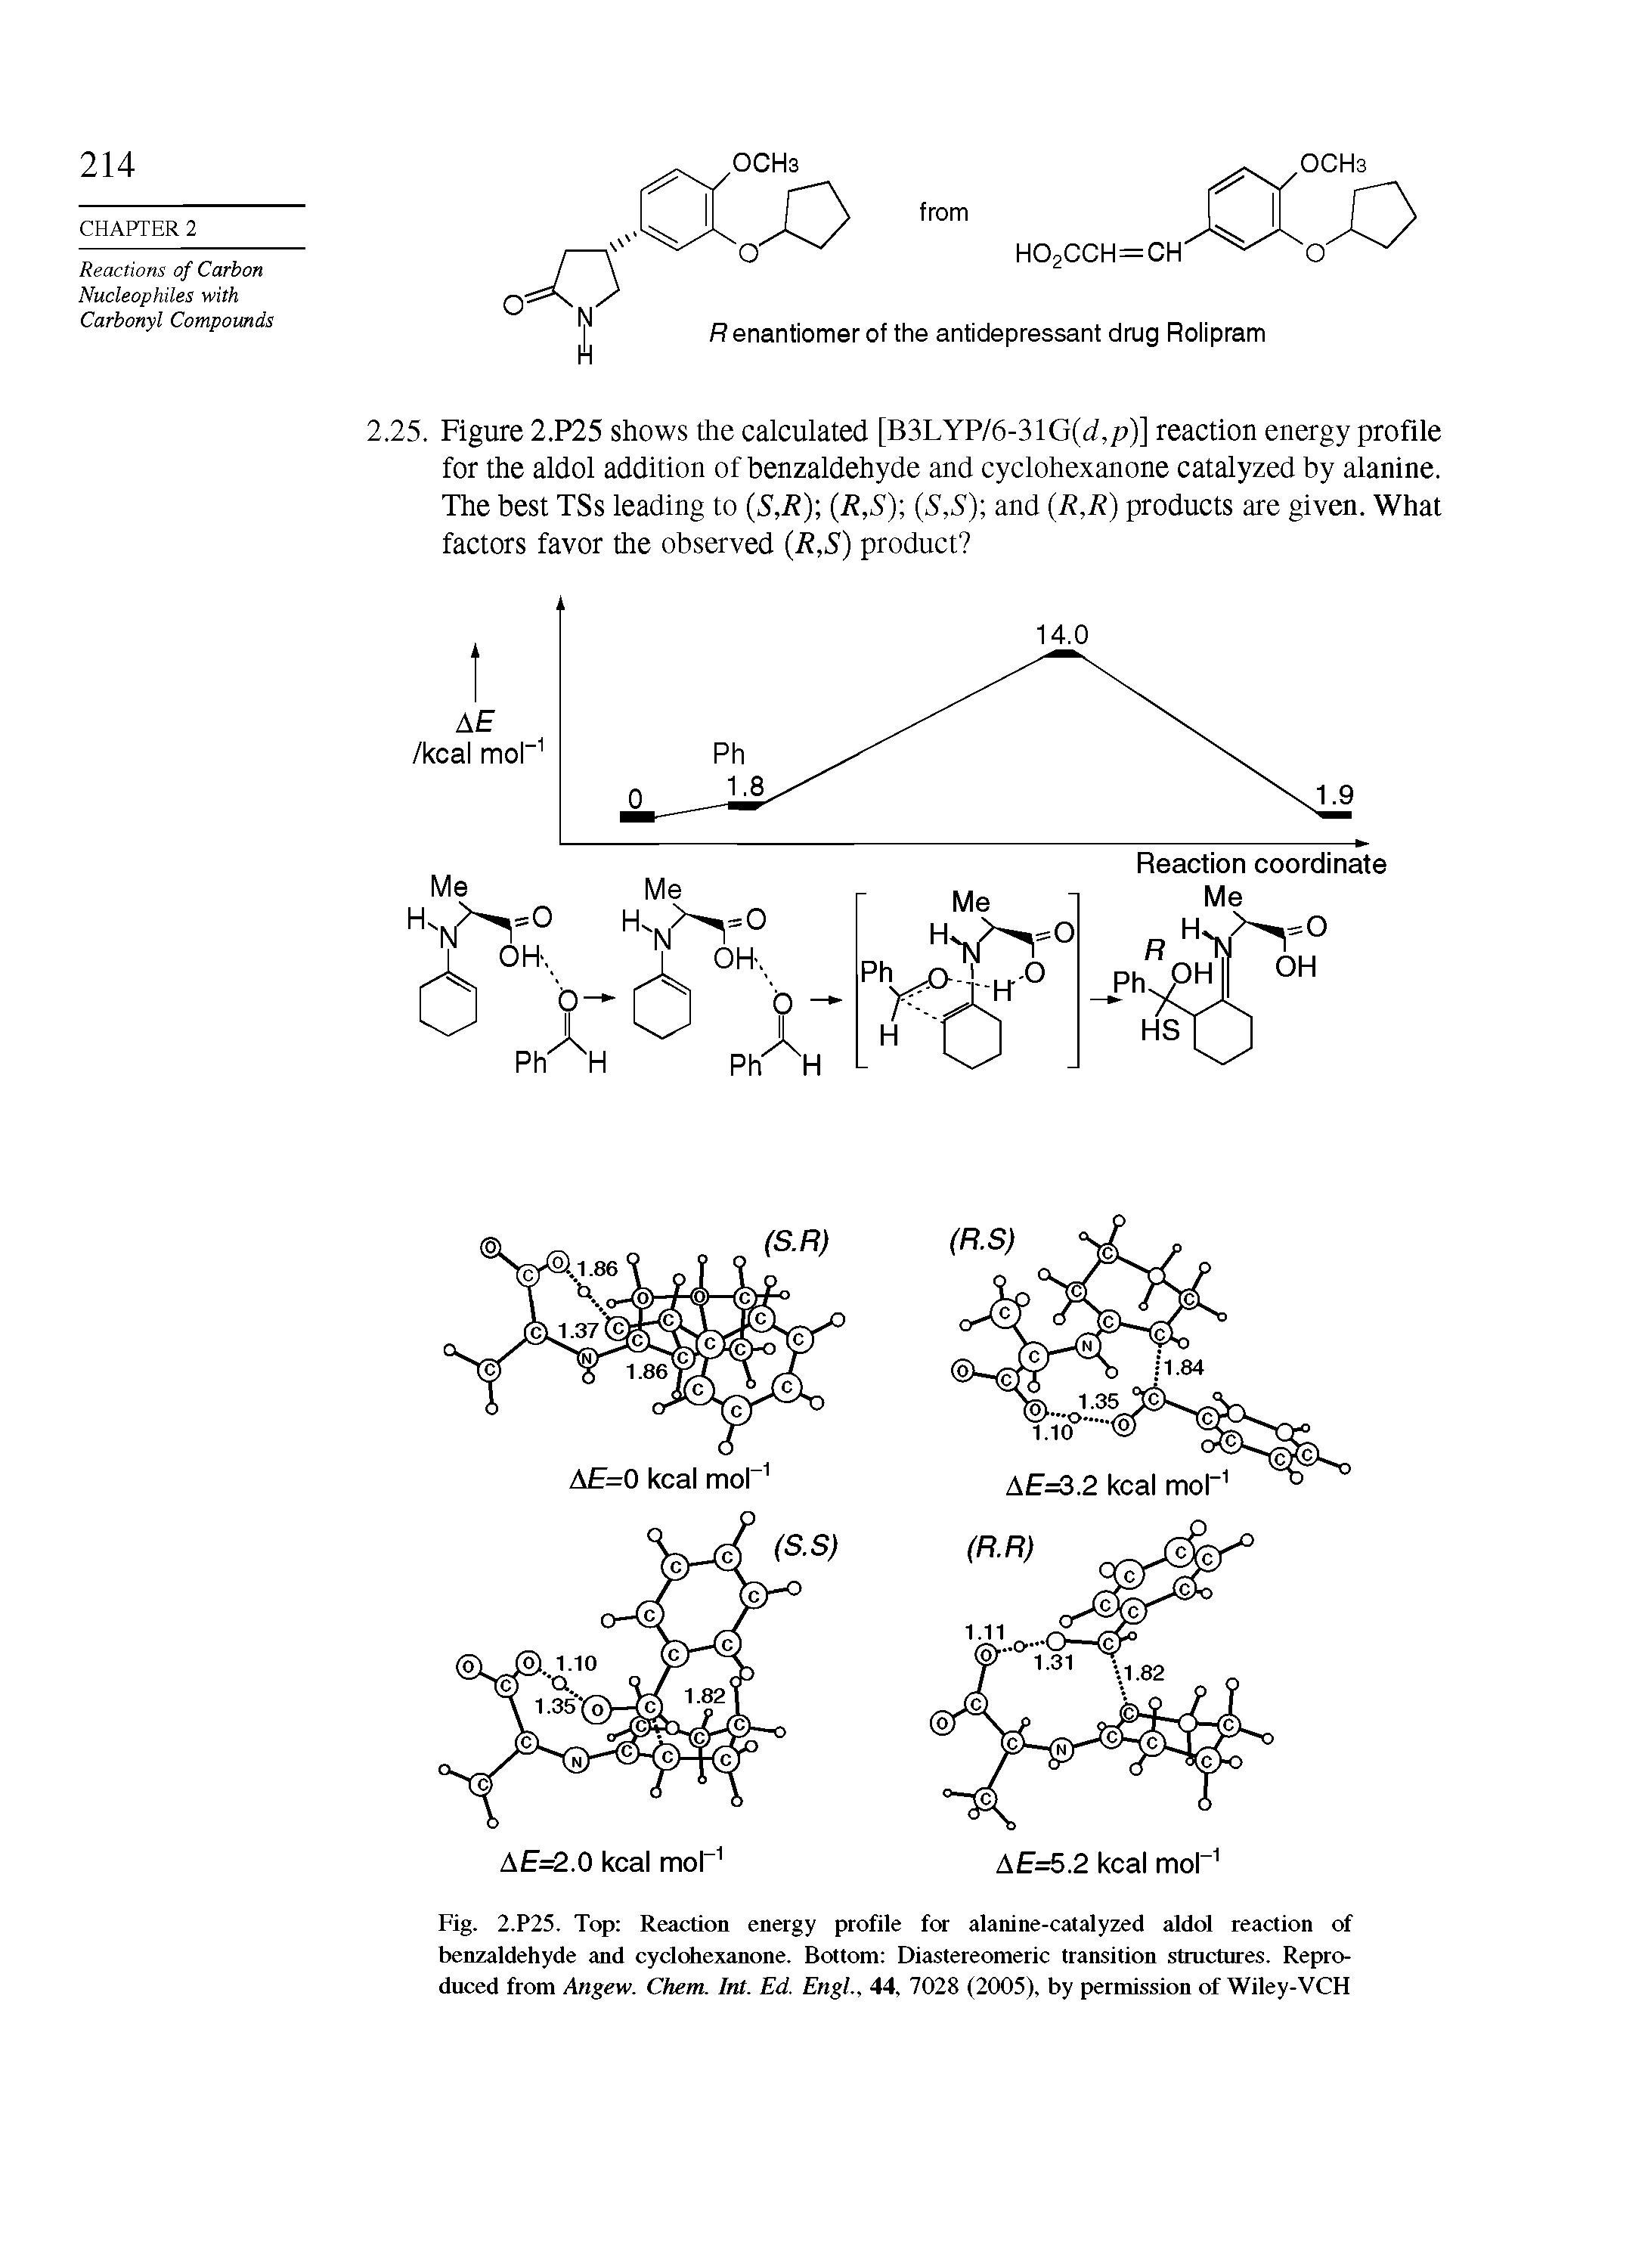 Fig. 2.P25. Top Reaction energy profile for alanine-catalyzed aldol reaction of benzaldehyde and cyclohexanone. Bottom Diastereomeric transition structures. Reproduced from Angew. Chem. Int. Ed. Engl., 44, 7028 (2005), by permission of Wiley-VCH...